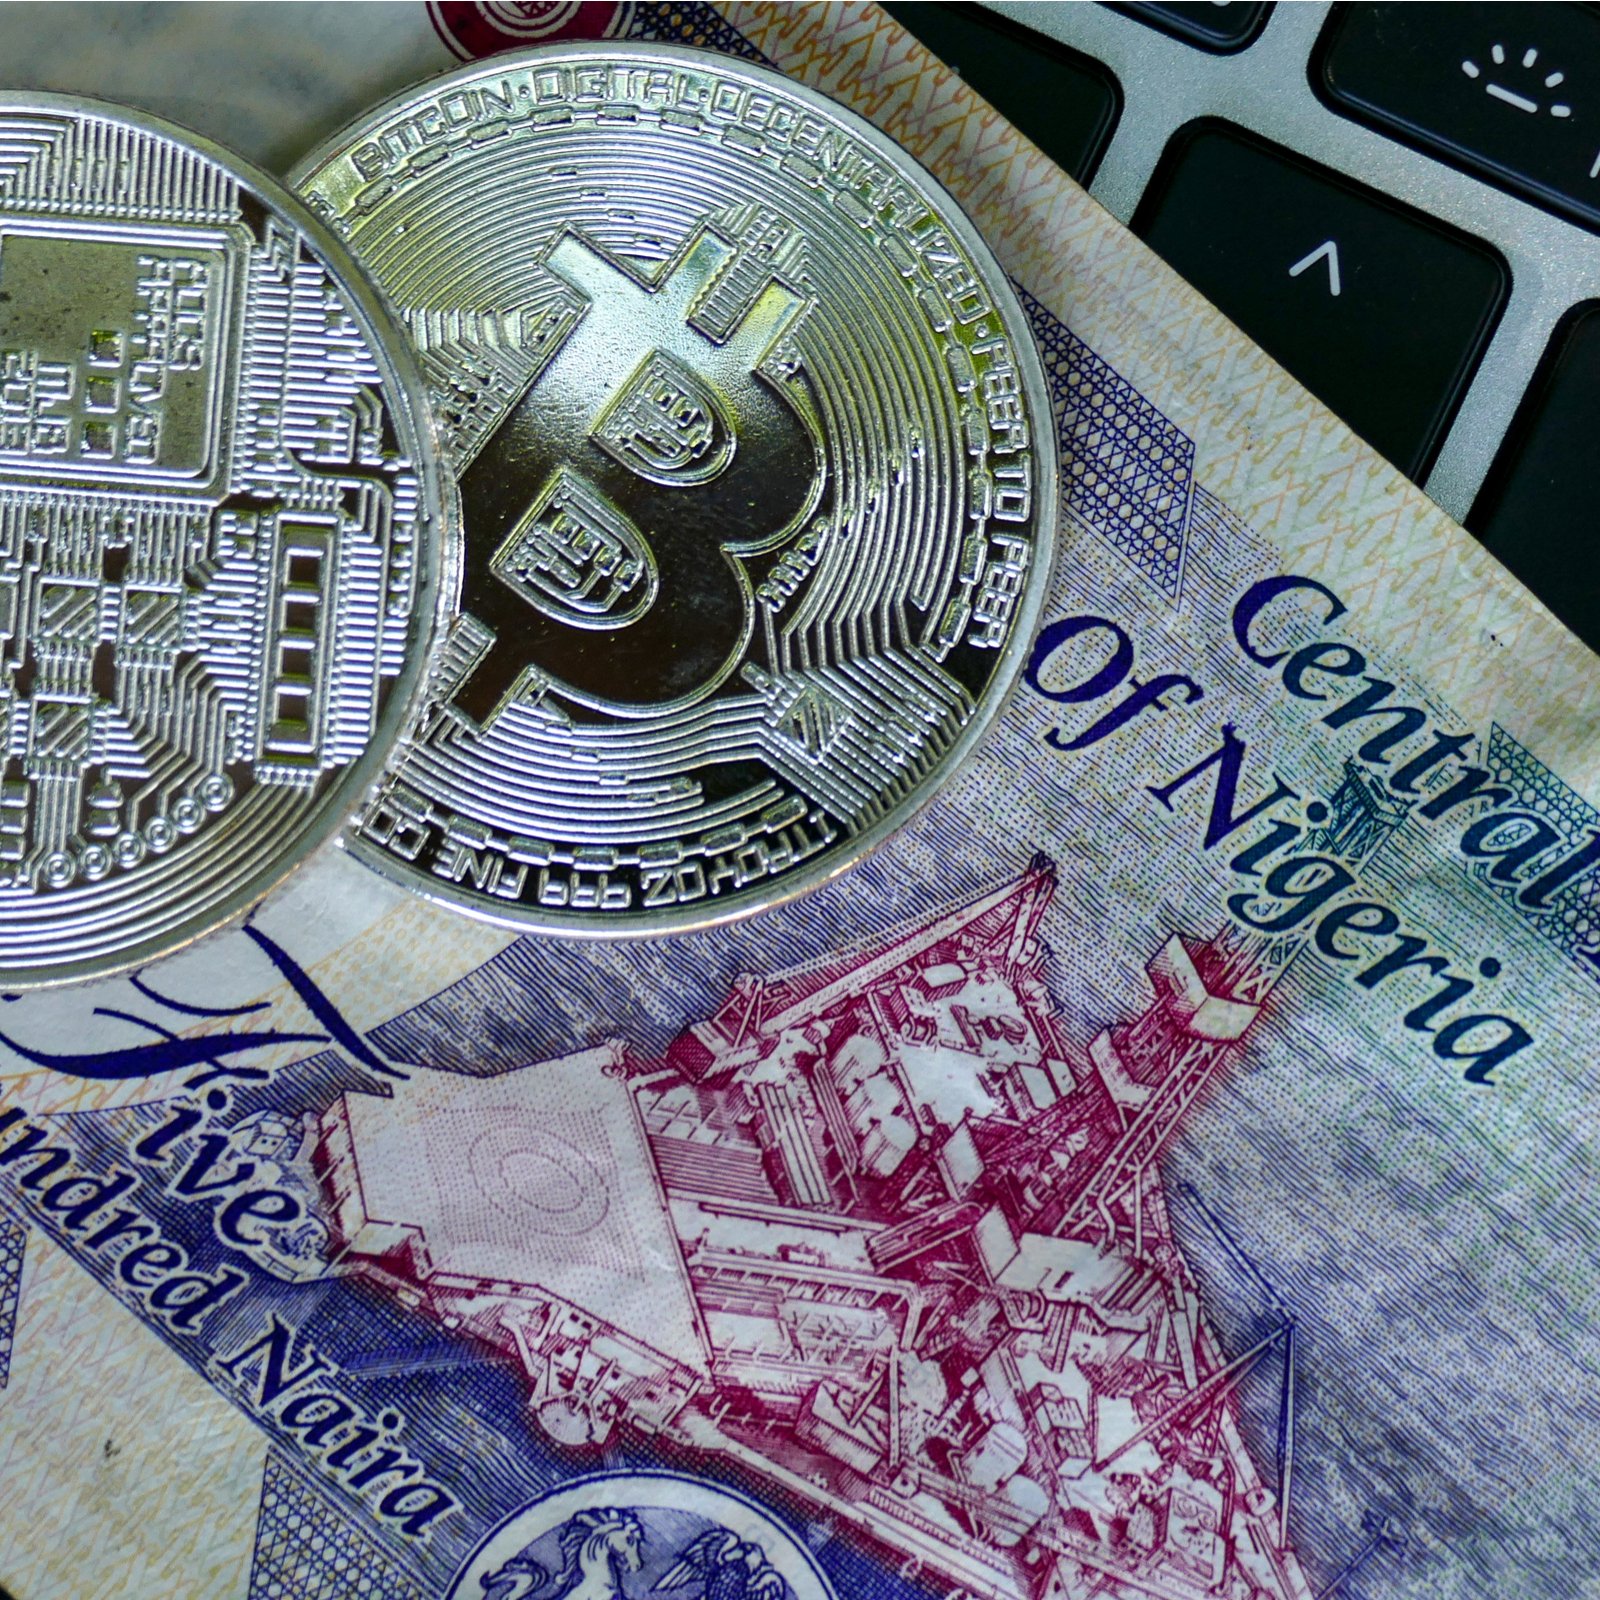 Nigerian P2P Bitcoin Exchange Offers Services to All African Nations